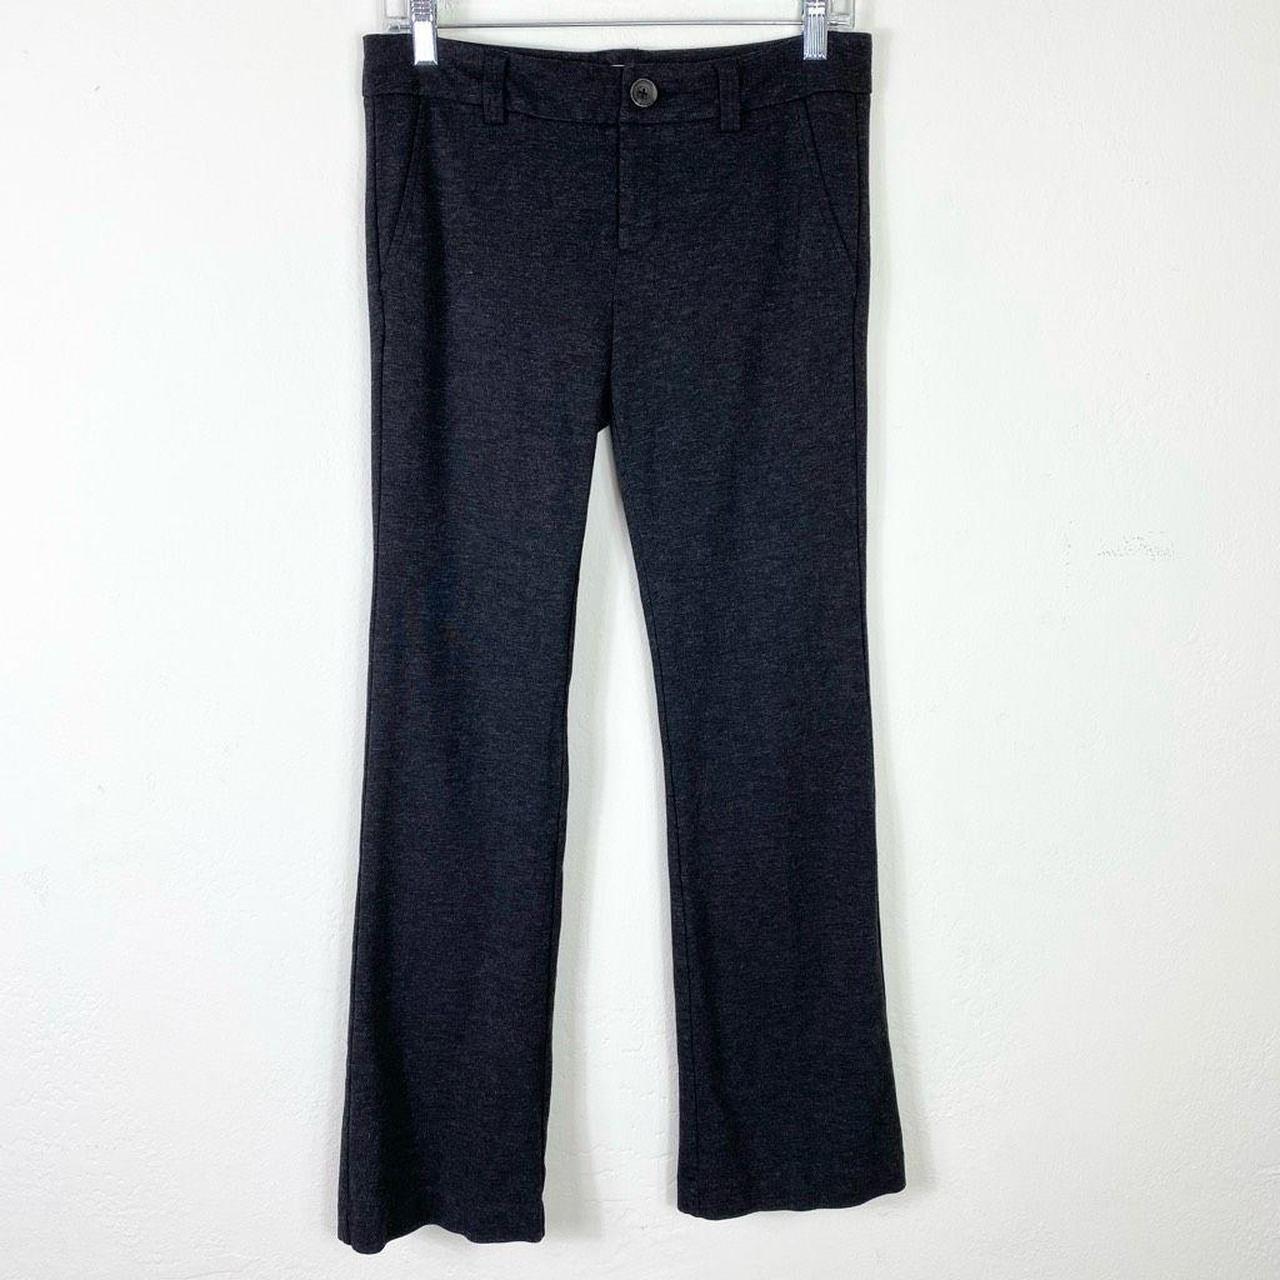 Y2K Low Rise Flare Trousers / Size 2 / Cabi Black Flare Pants